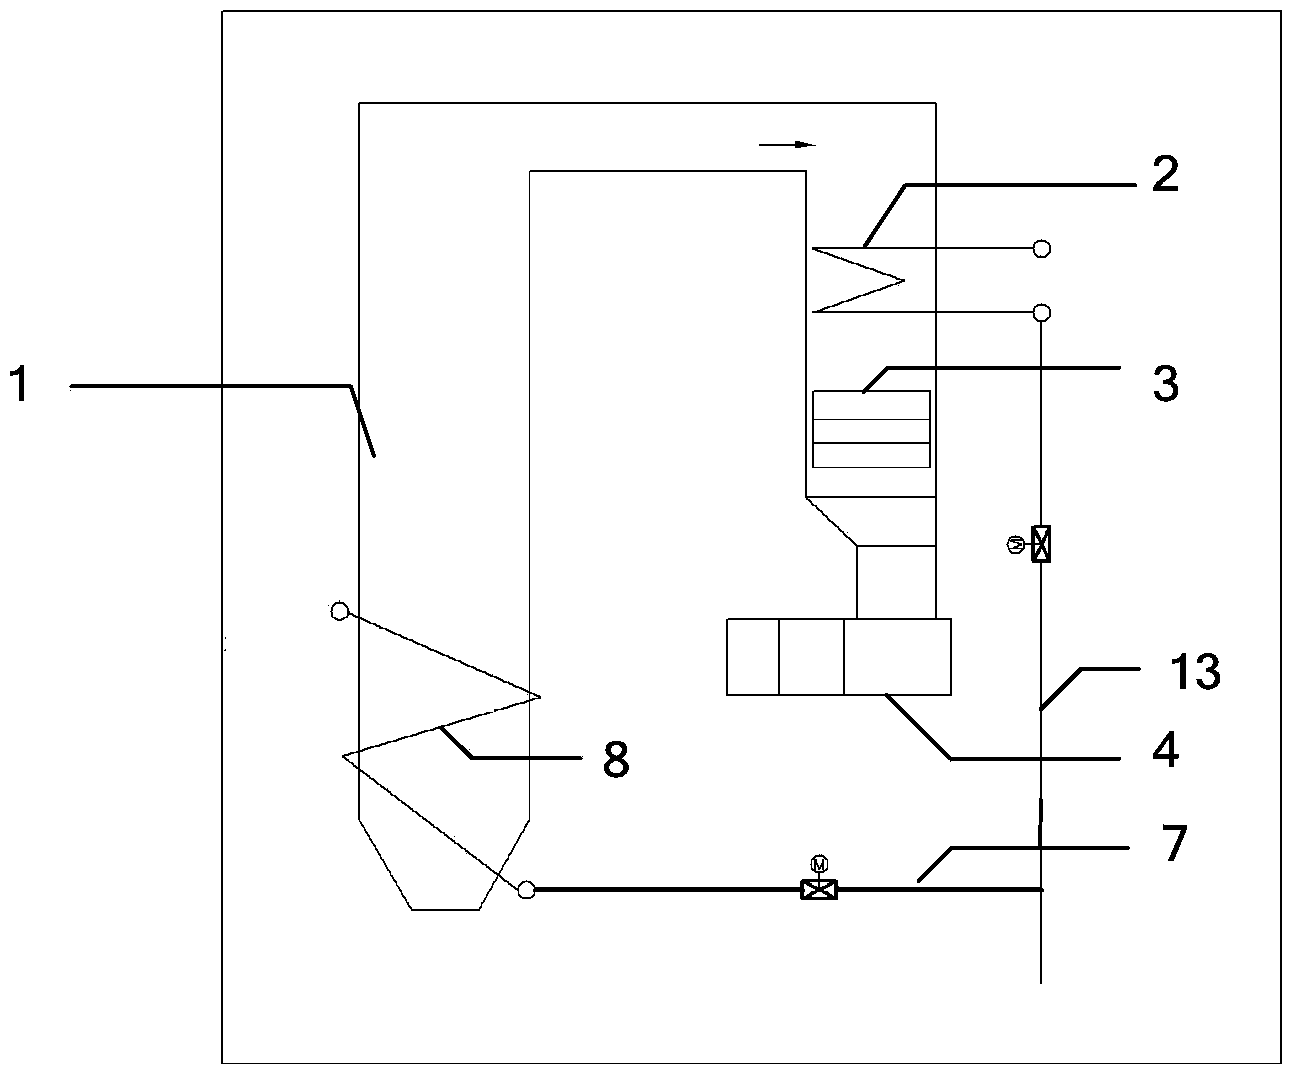 Denitration device with economizer re-circulating system and generator unit